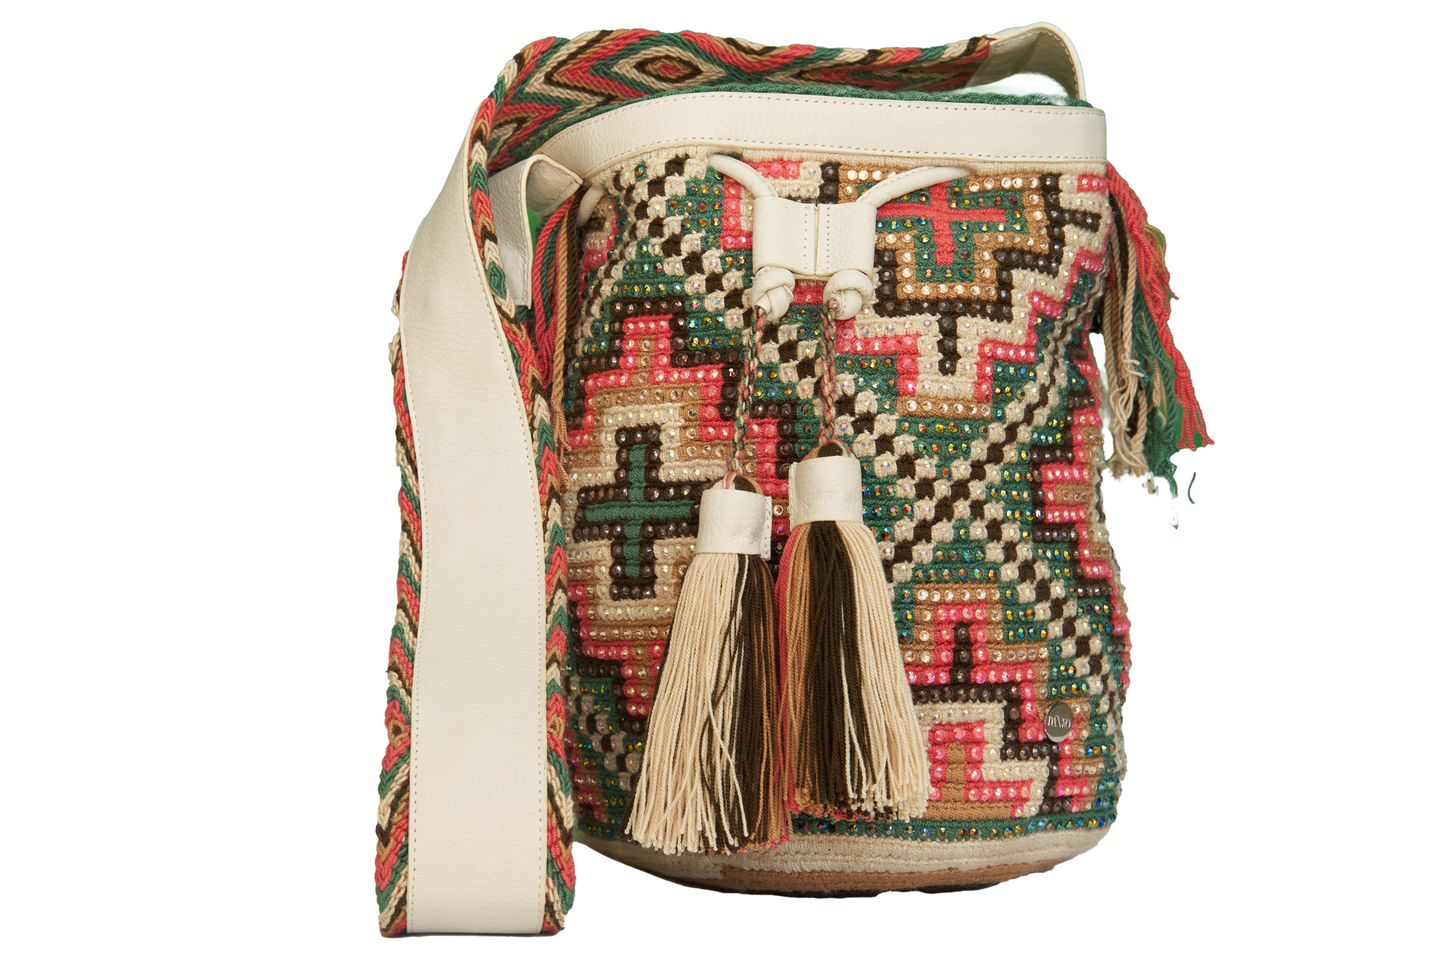 White Leather Wayuu Bag with Multicoloured Gems and two tassels. The mochila has a cross shaped pattern 